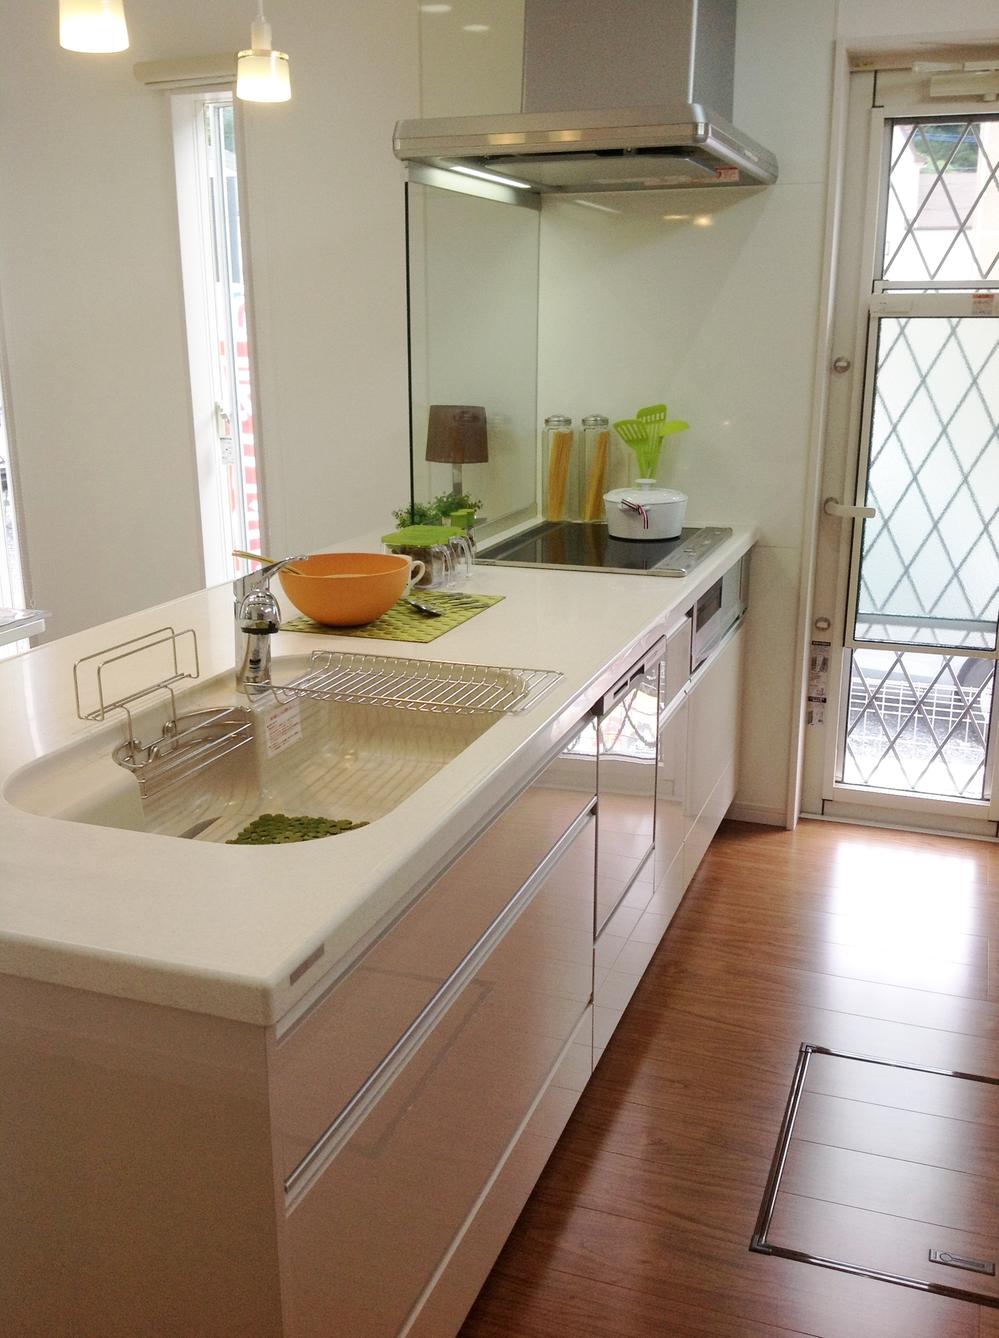 Other Equipment. Face-to-face kitchen of the latest model ・ Fashionable artificial marble sinks